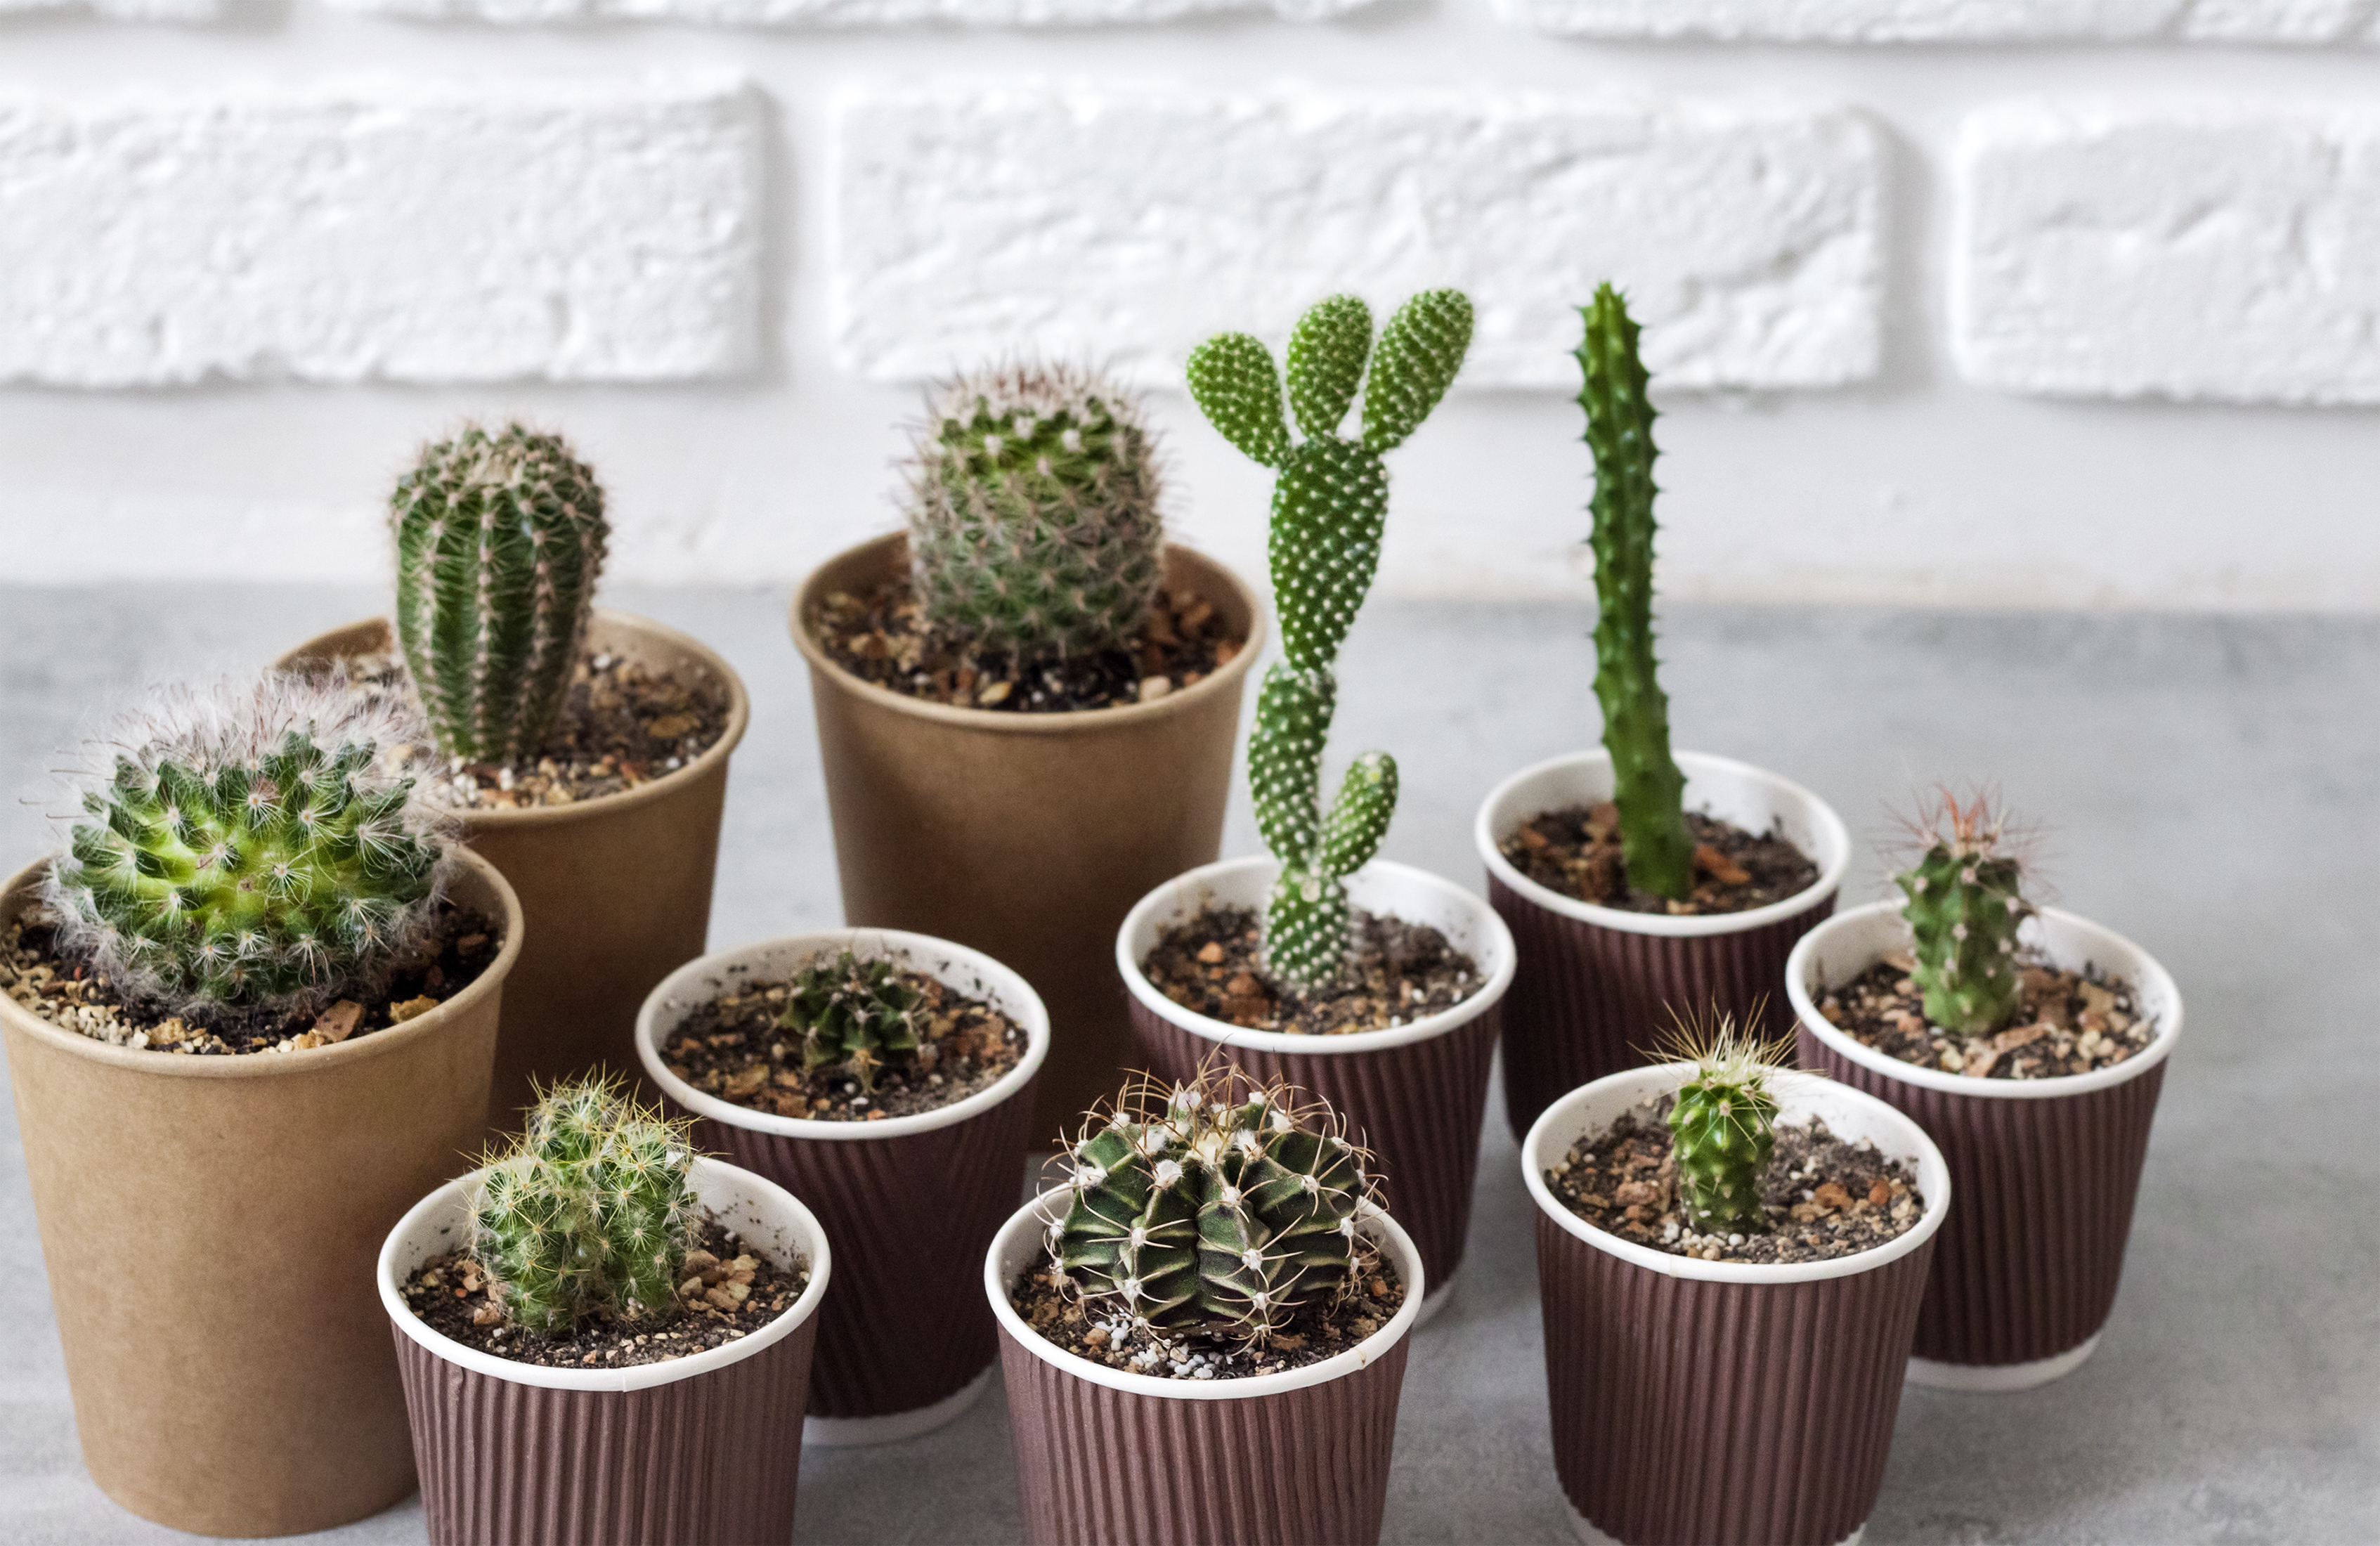 12. How Long Do Cacti Typically Live?